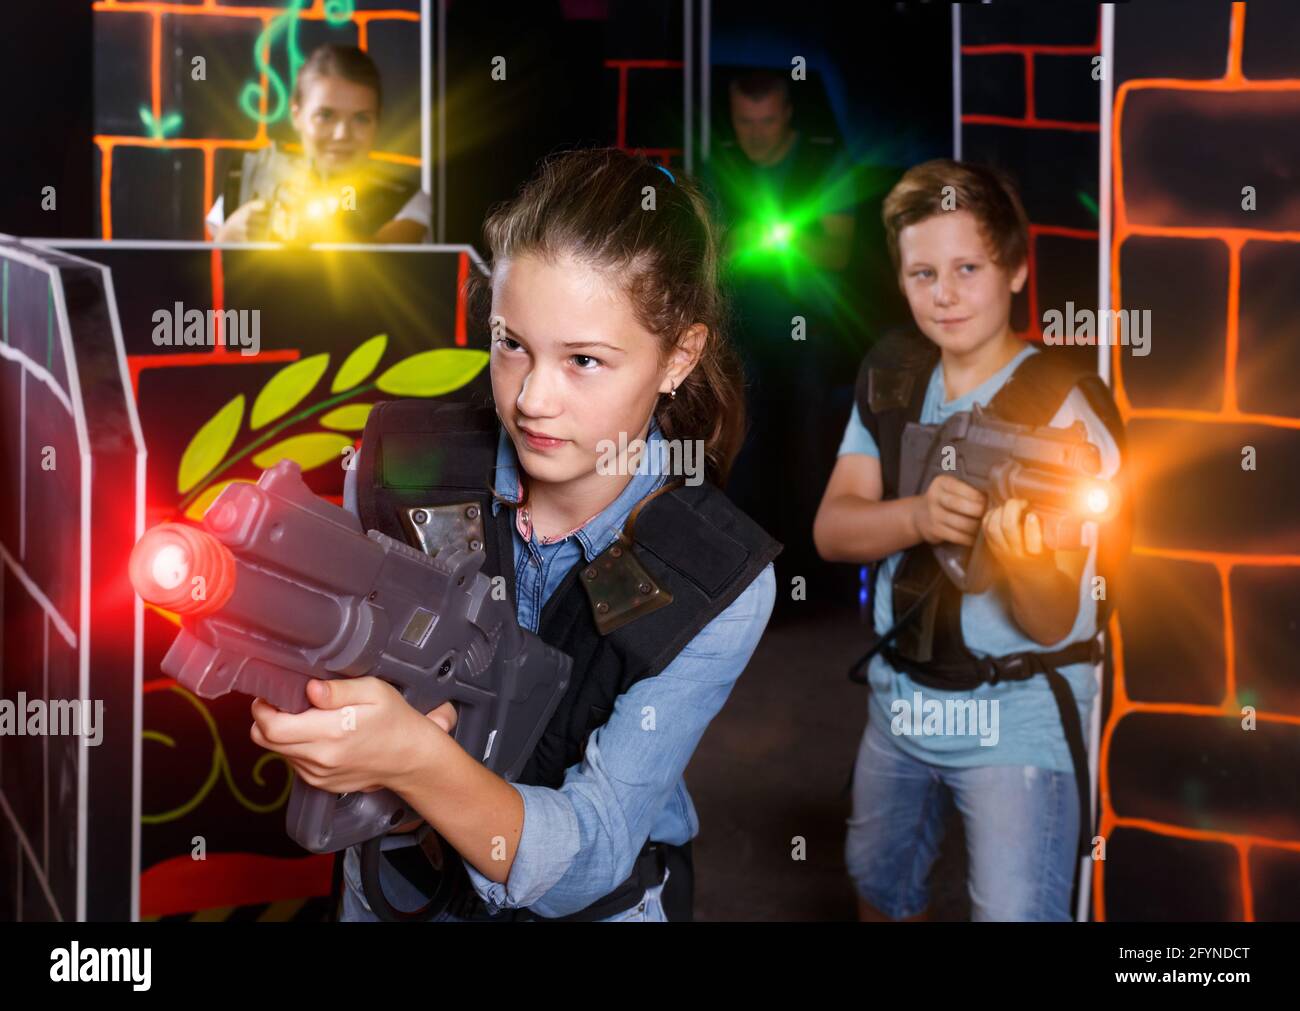 Nice girl aiming laser gun at other players during laser tag game in dark  room Stock Photo - Alamy